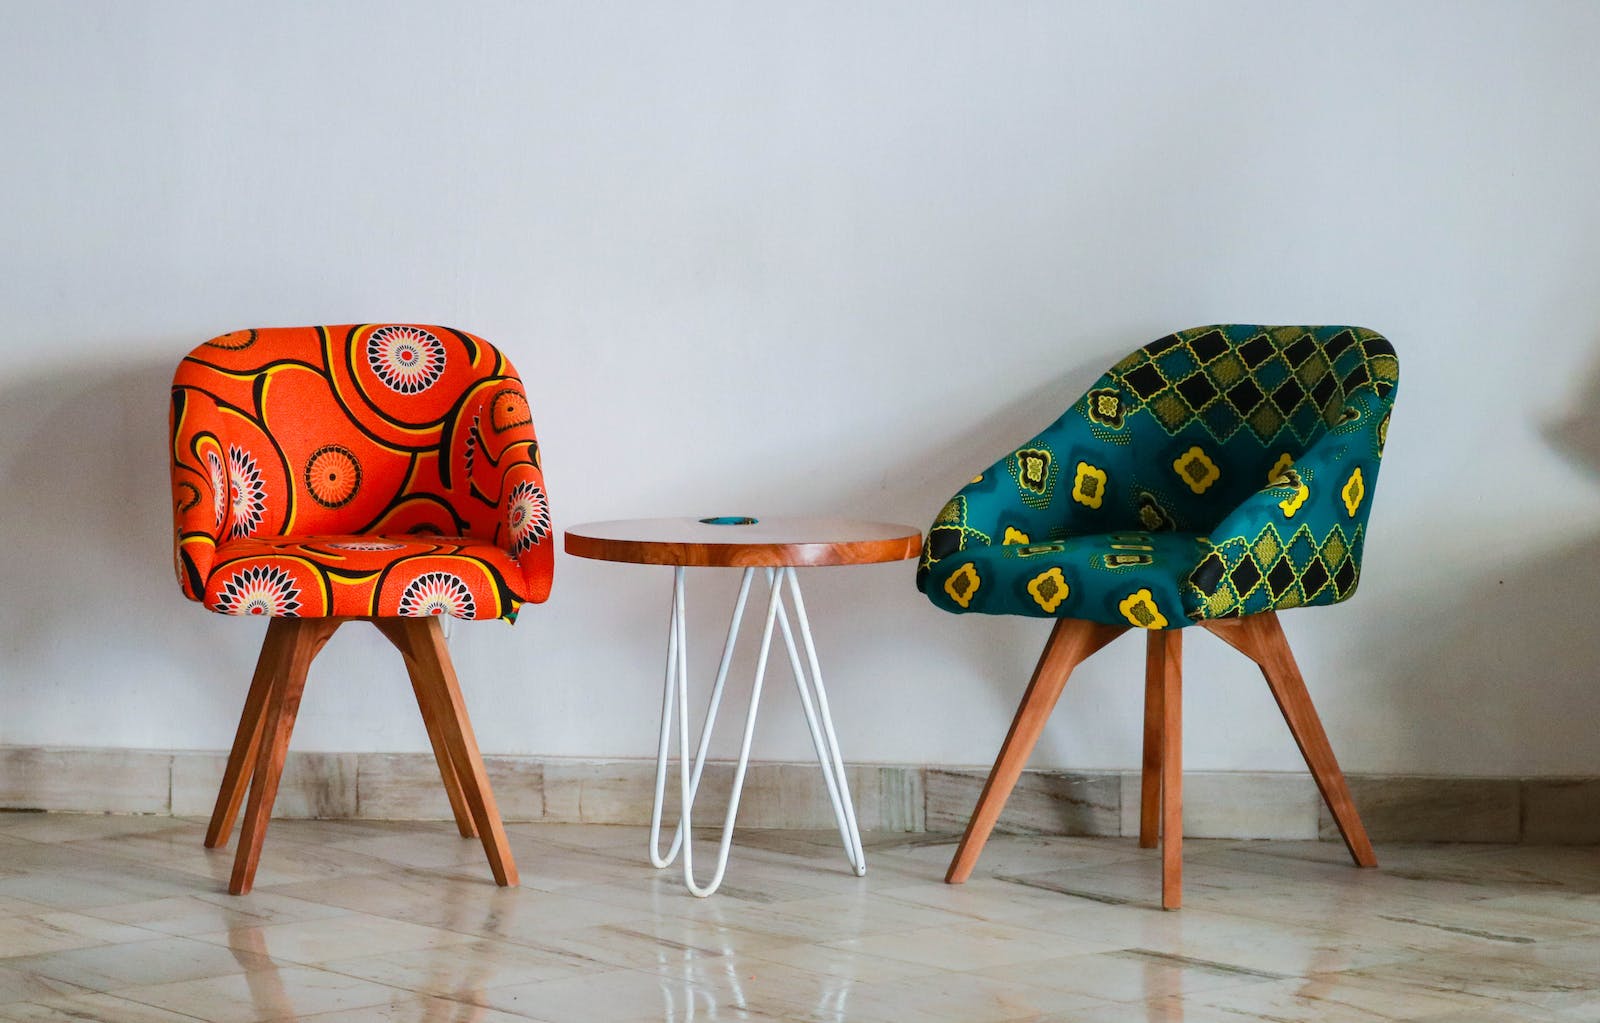 Art of Upcycled Furniture